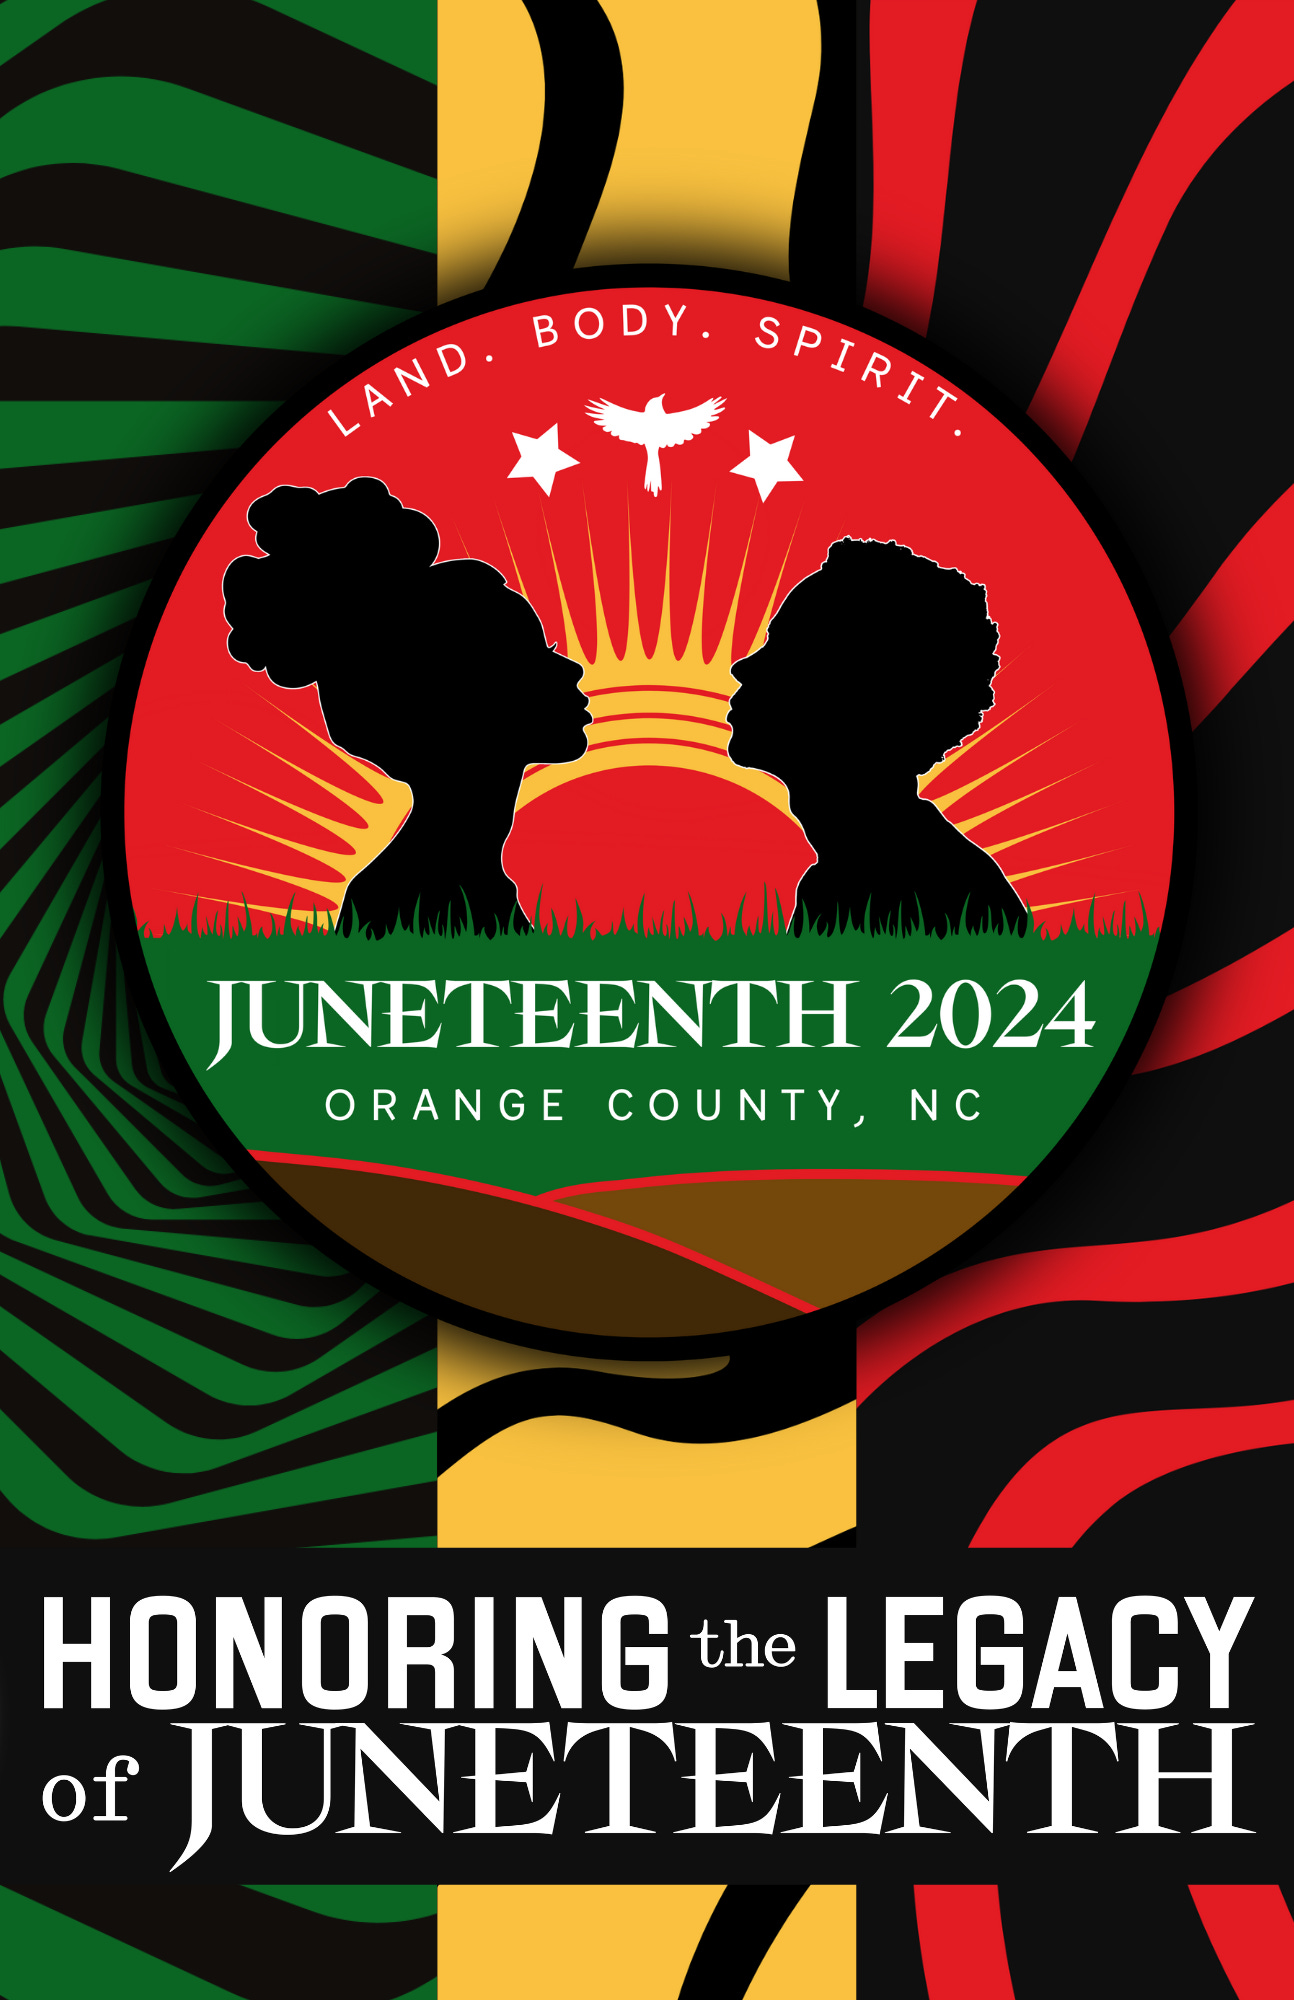 Juneteenth 2024 in Orange County, NC. Honoring the legacy of Juneteenth.